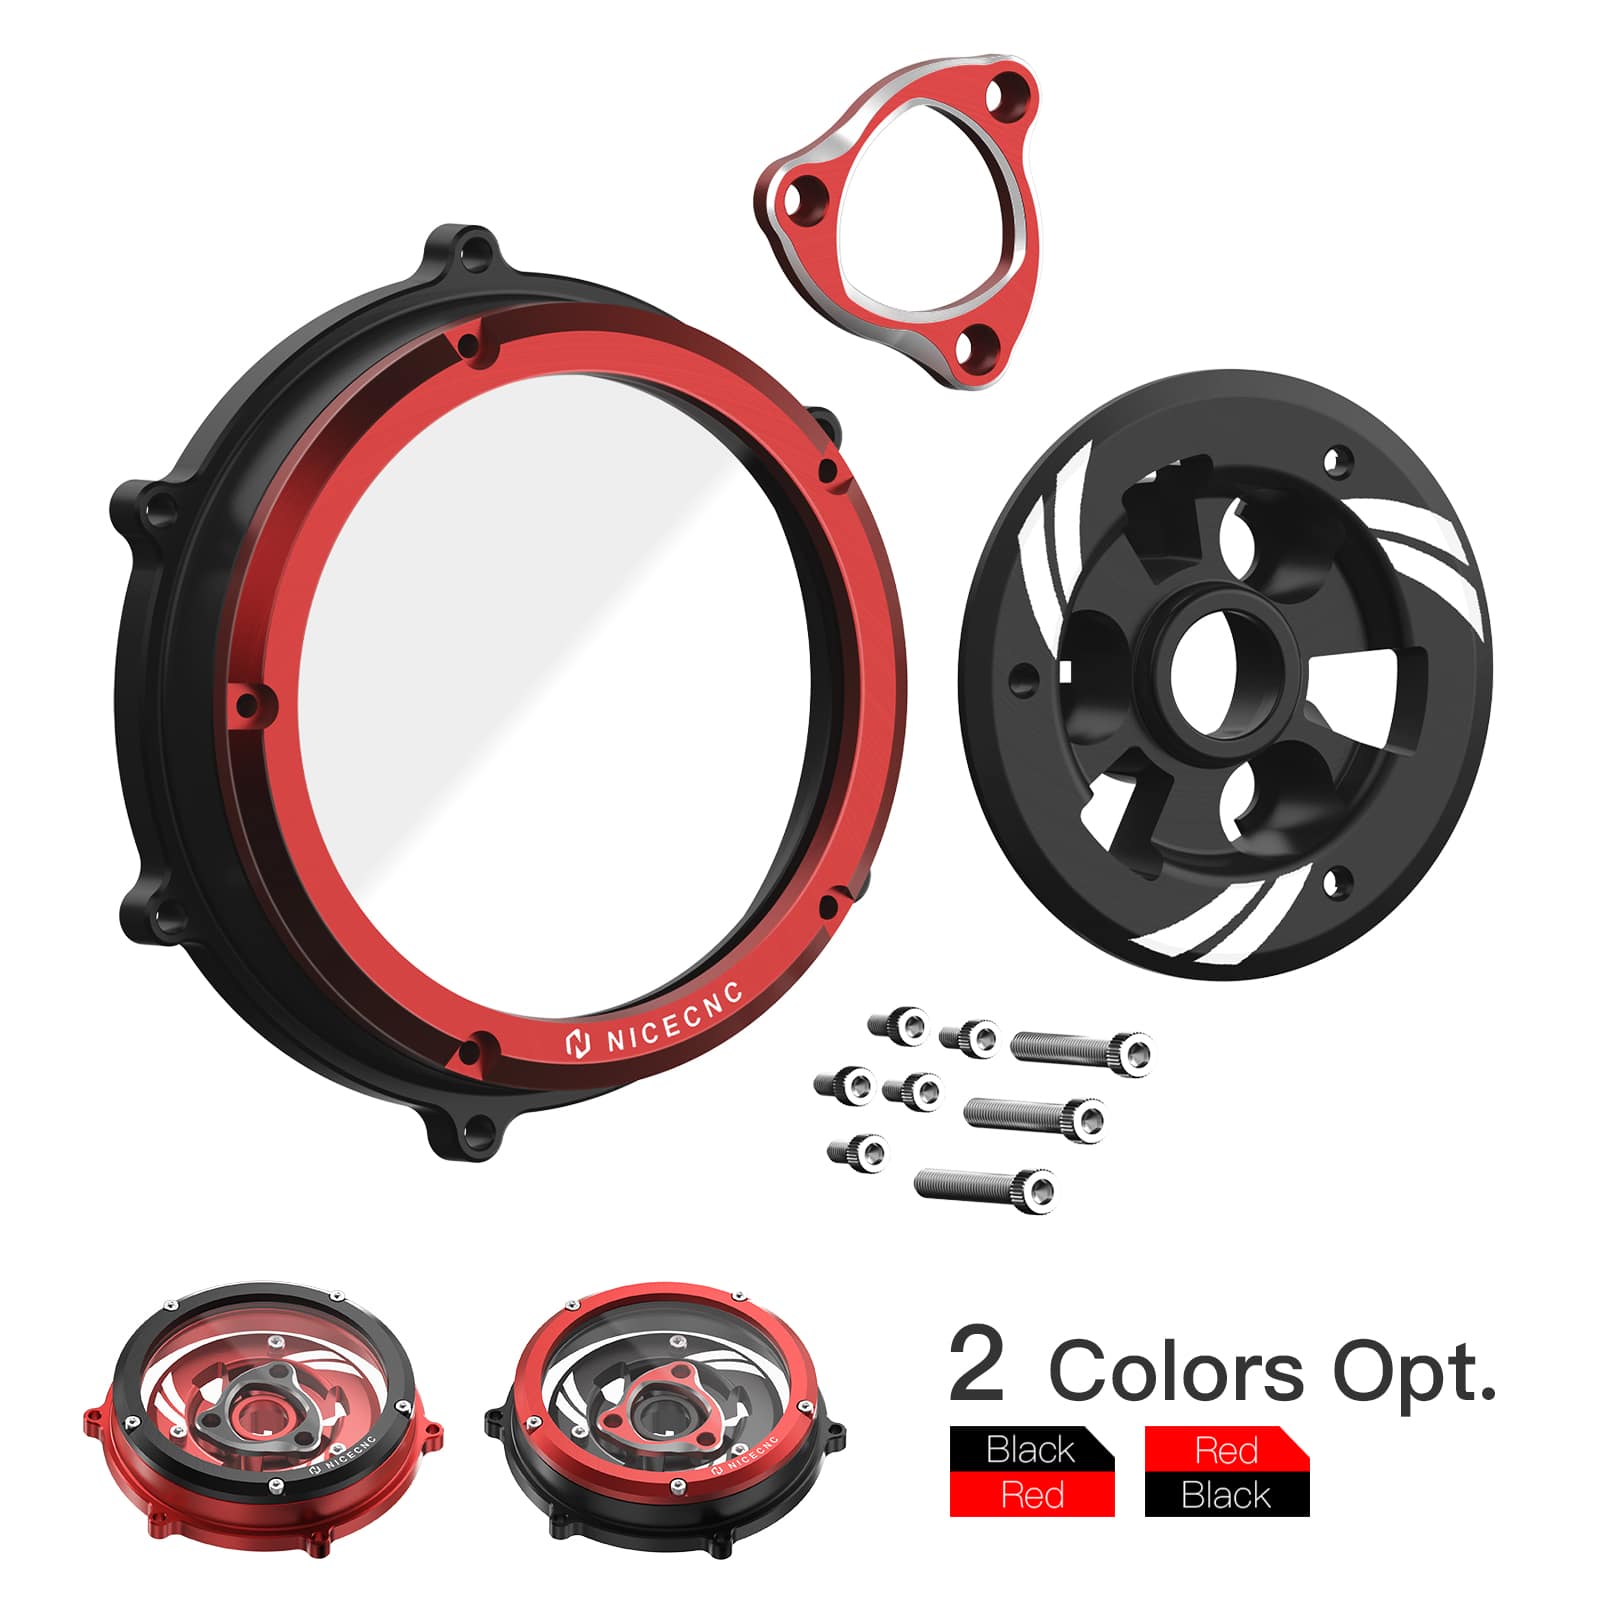 Transparent Engine Clutch Cover Kit For Ducati Panigale V4/S 2018-2021